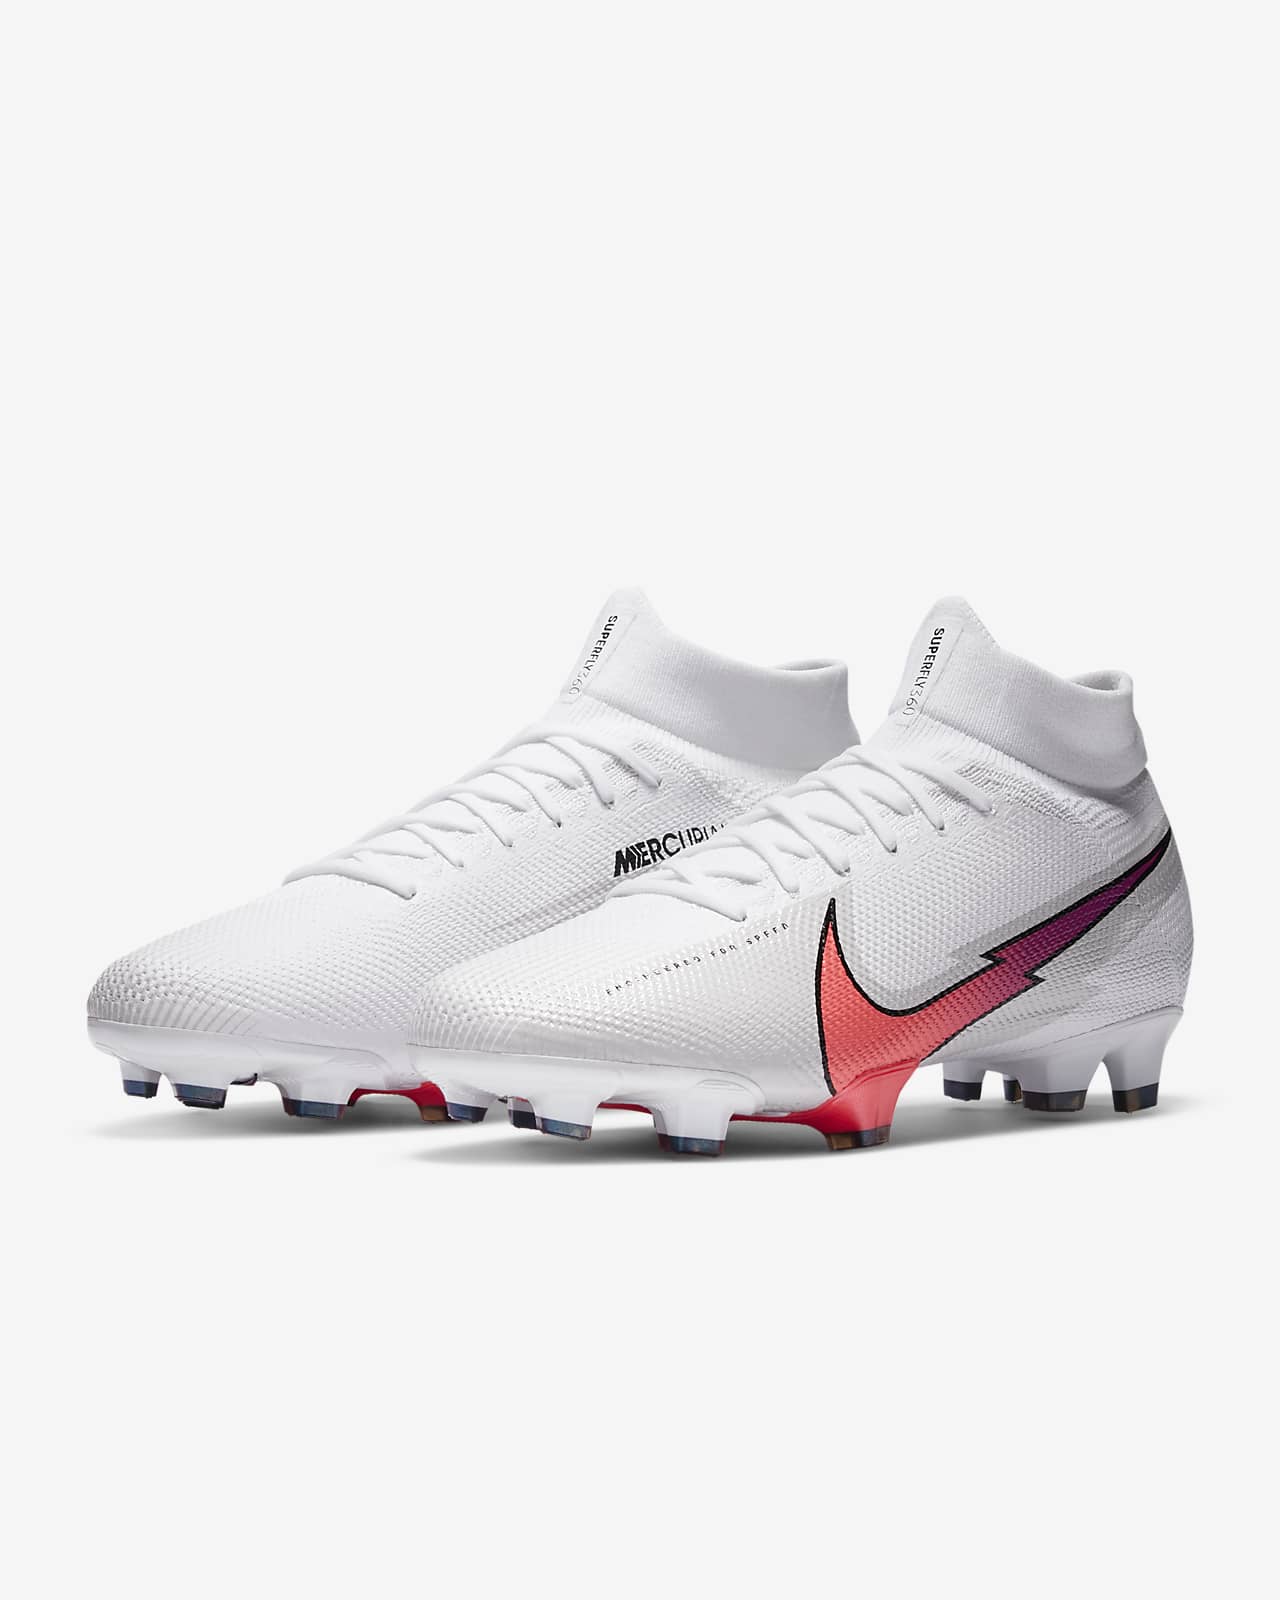 nike mercurial superfly 7 pro mds fg